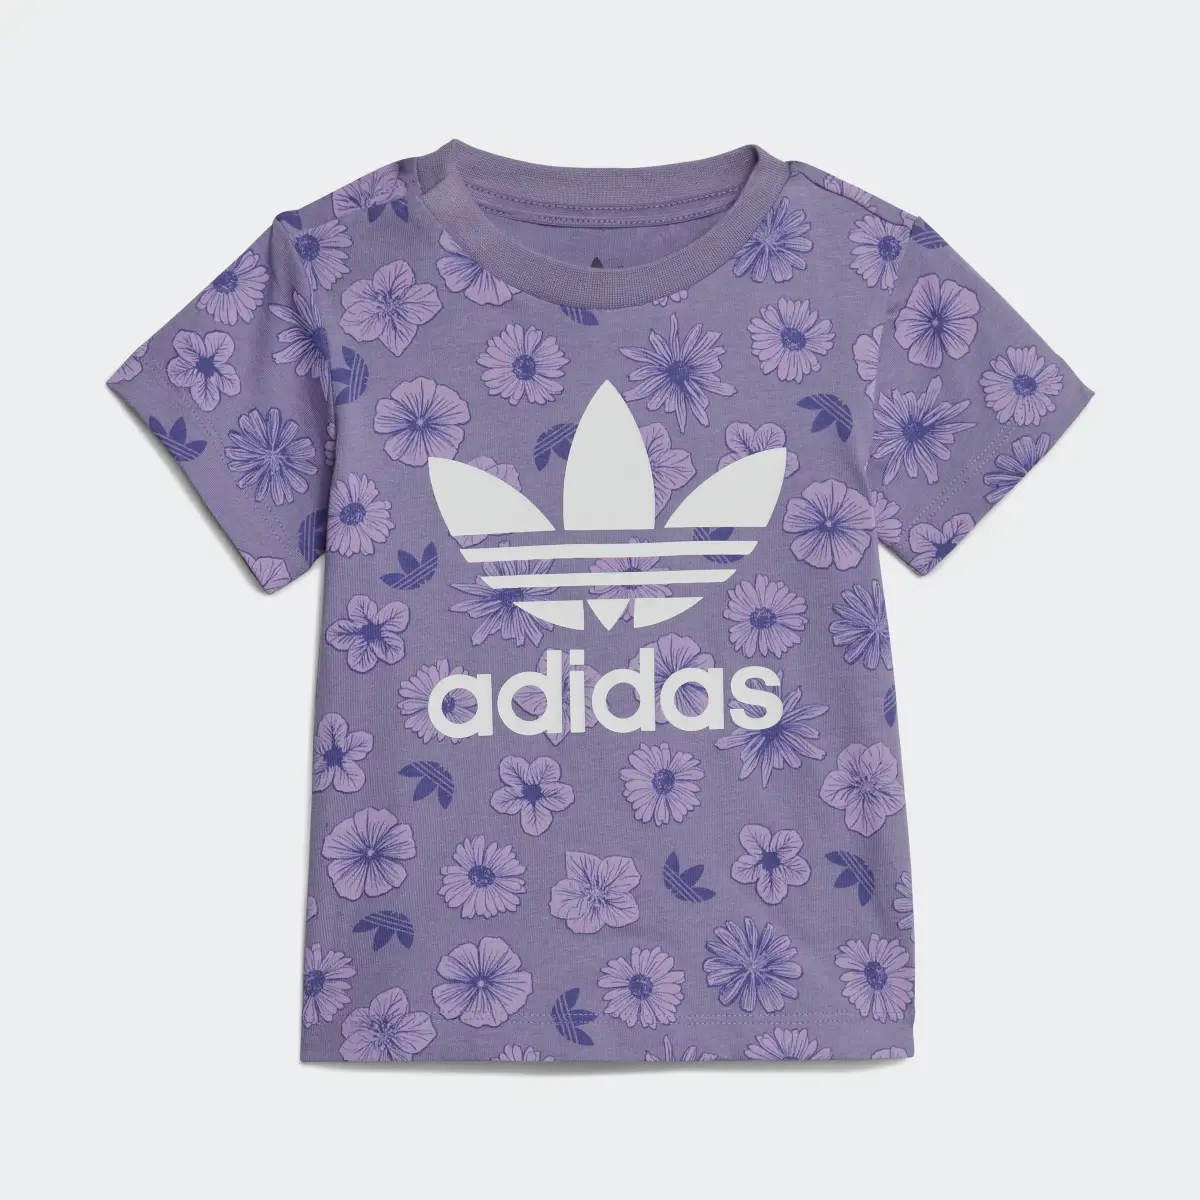 Adidas Completo Floral Tee and Shorts. 3